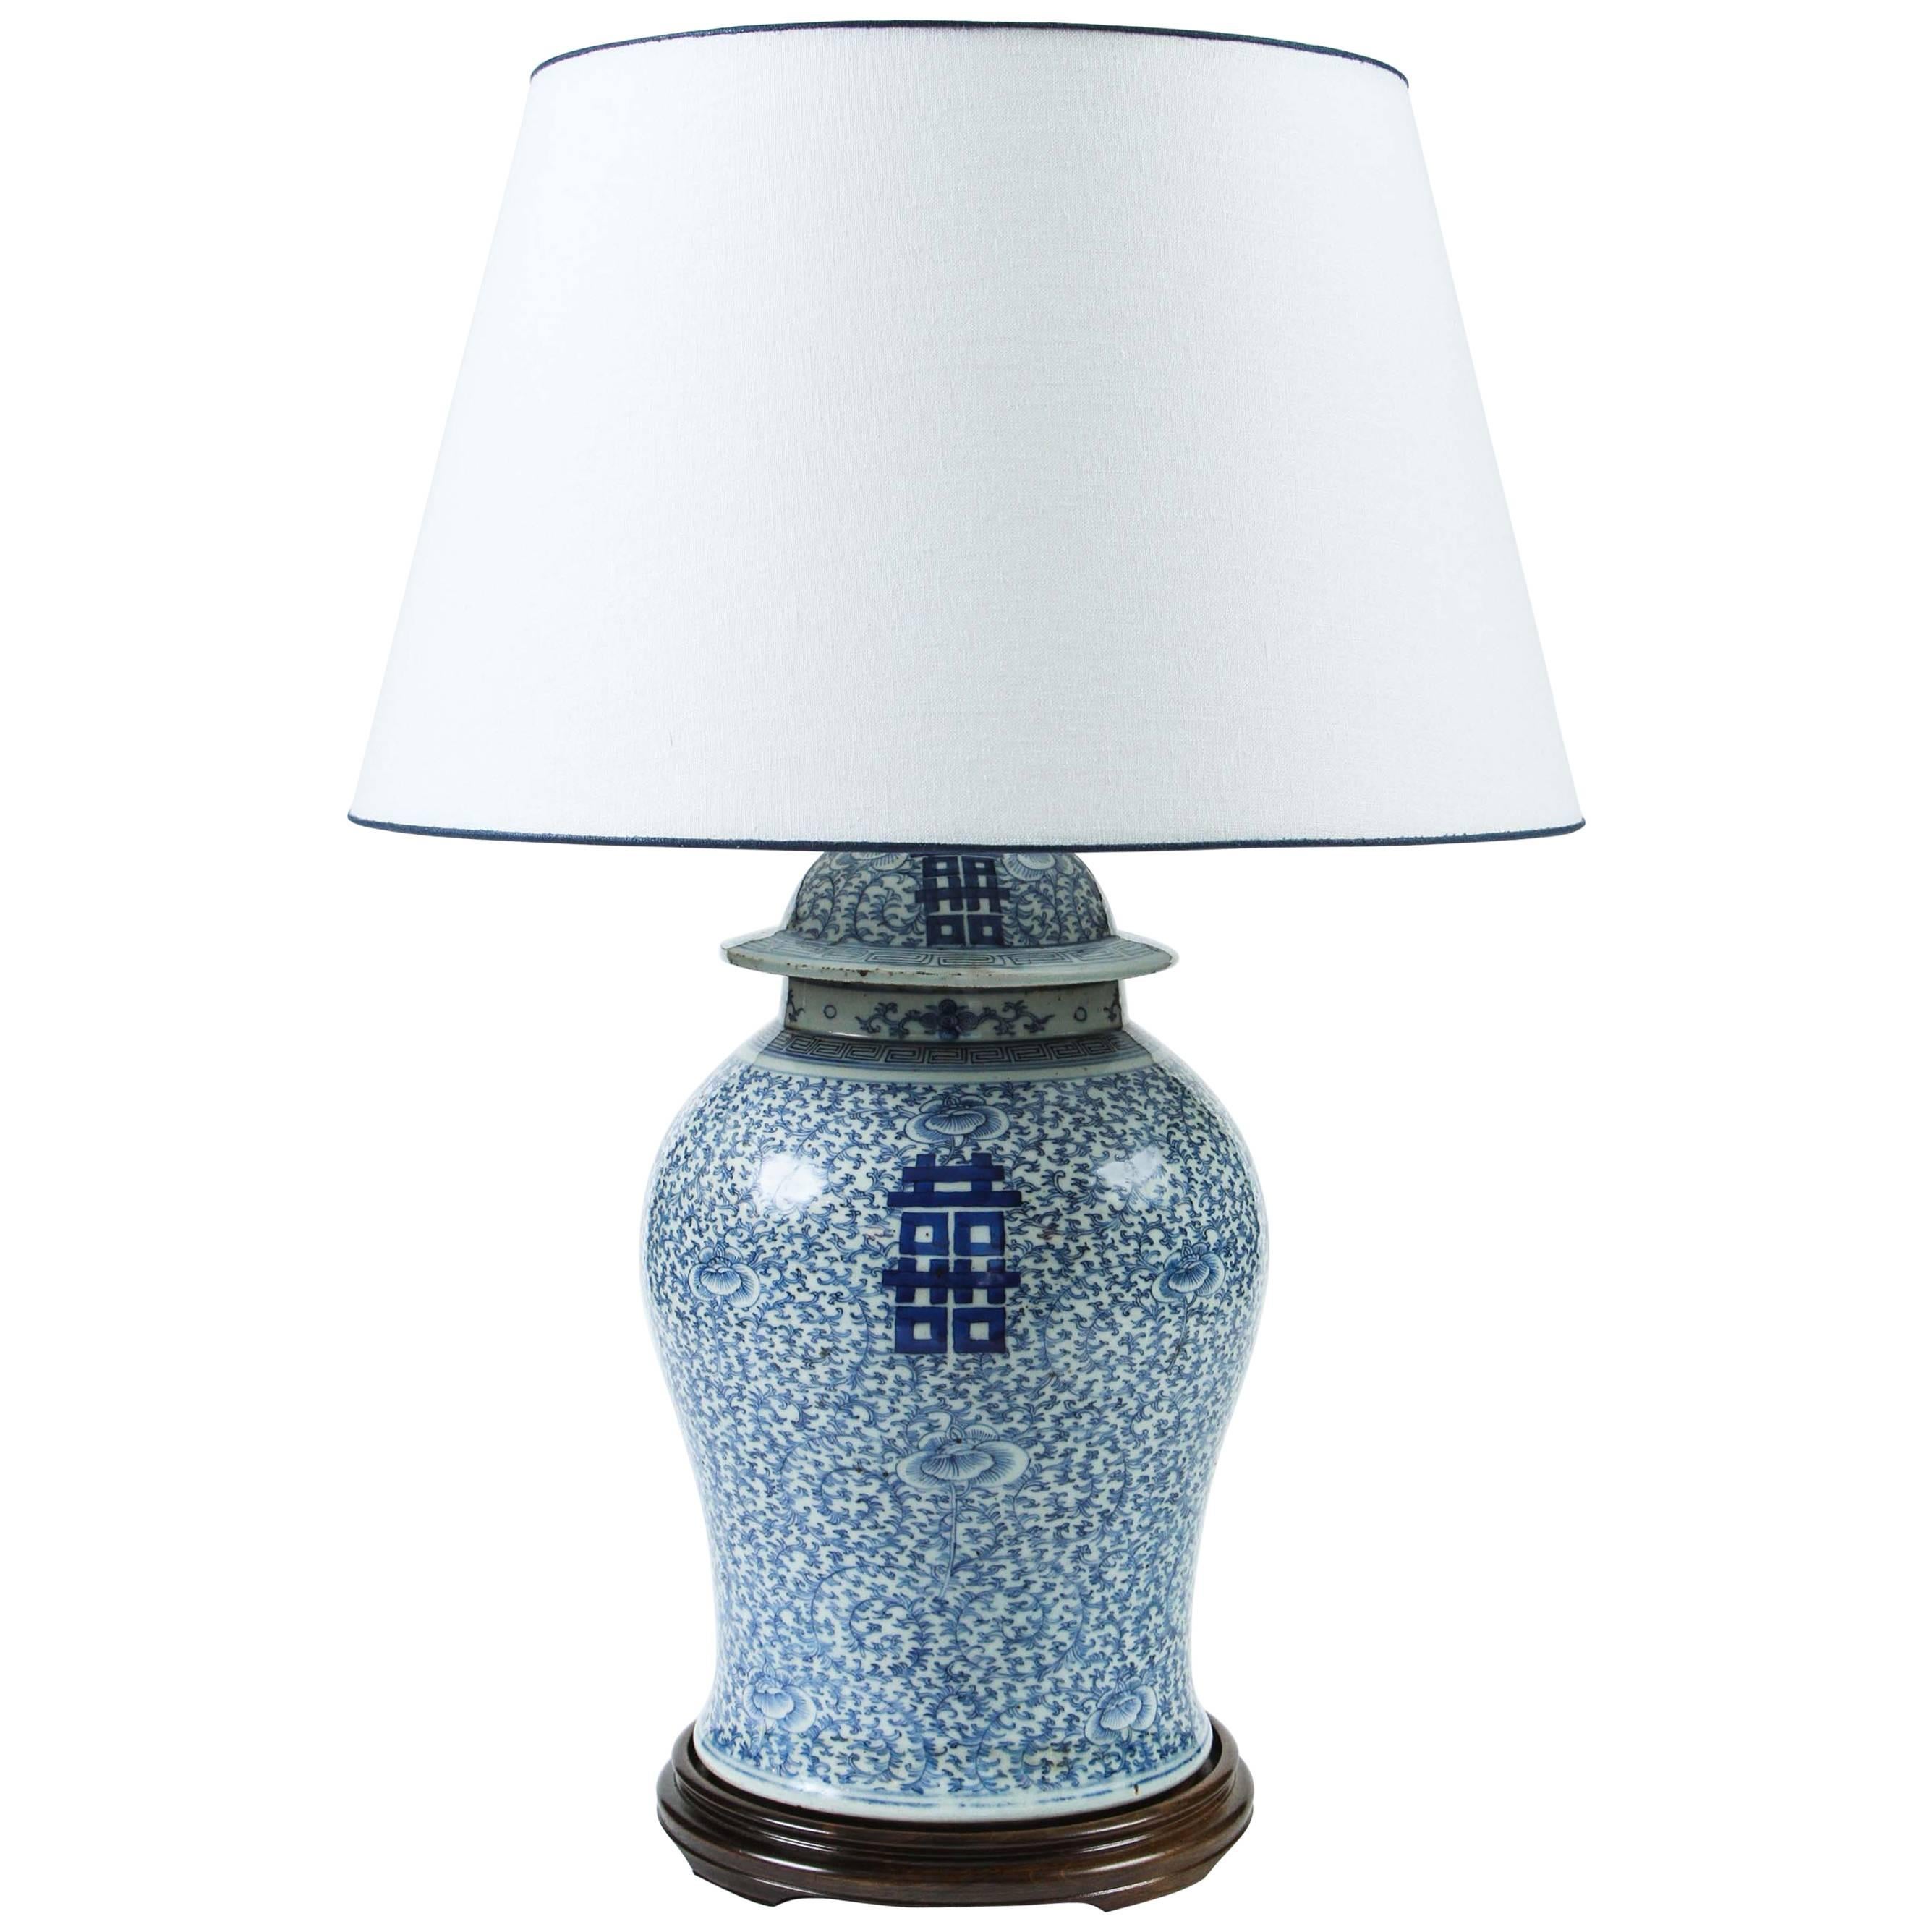 19th Century Chinese Porcelain Ginger Jar, Mounted as a Lamp